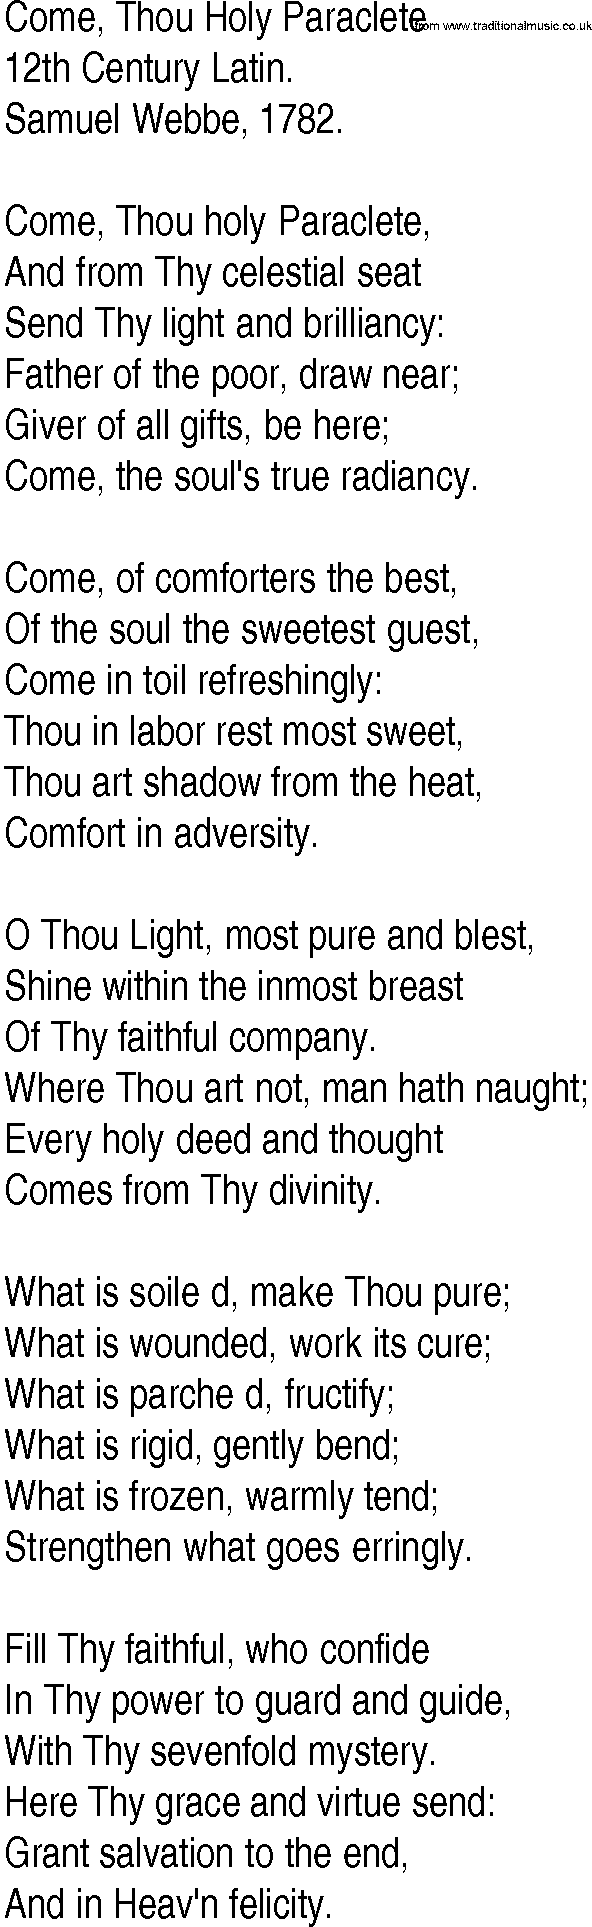 Hymn and Gospel Song: Come, Thou Holy Paraclete by th Century Latin lyrics